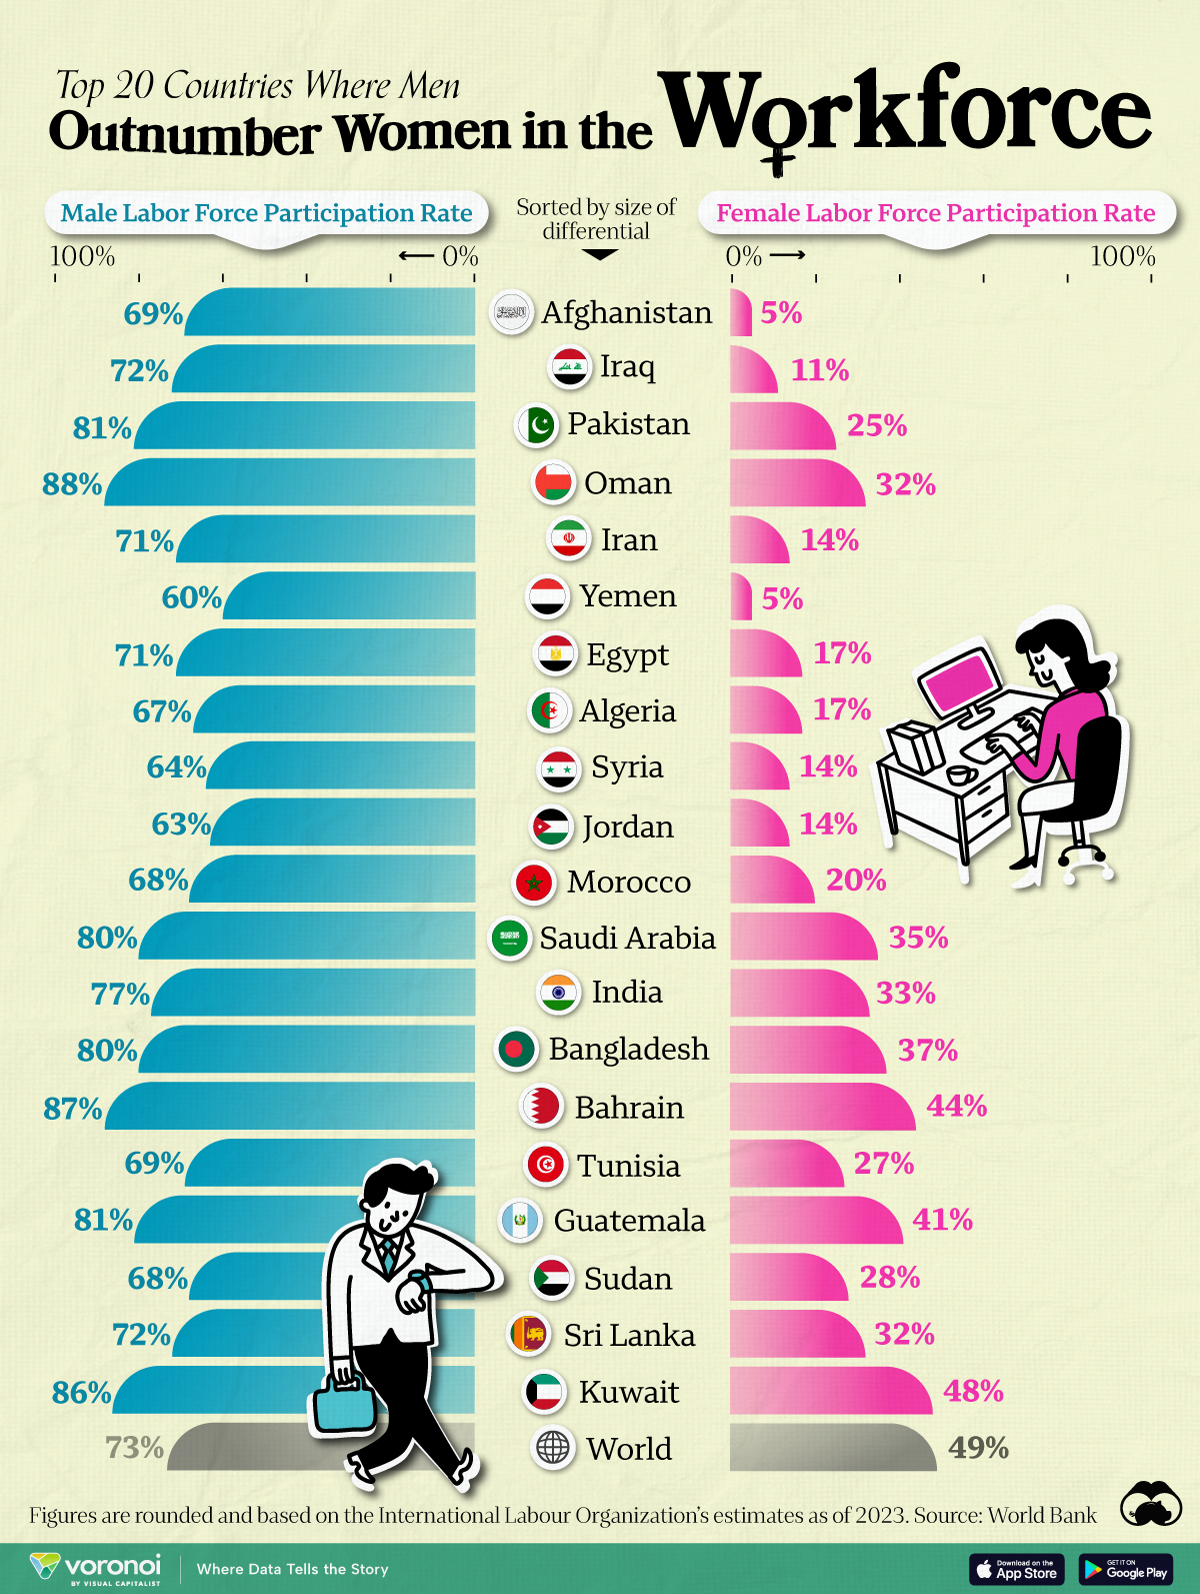 A chart ranking the biggest gender disparities in male and female labor force participation rates around the world.